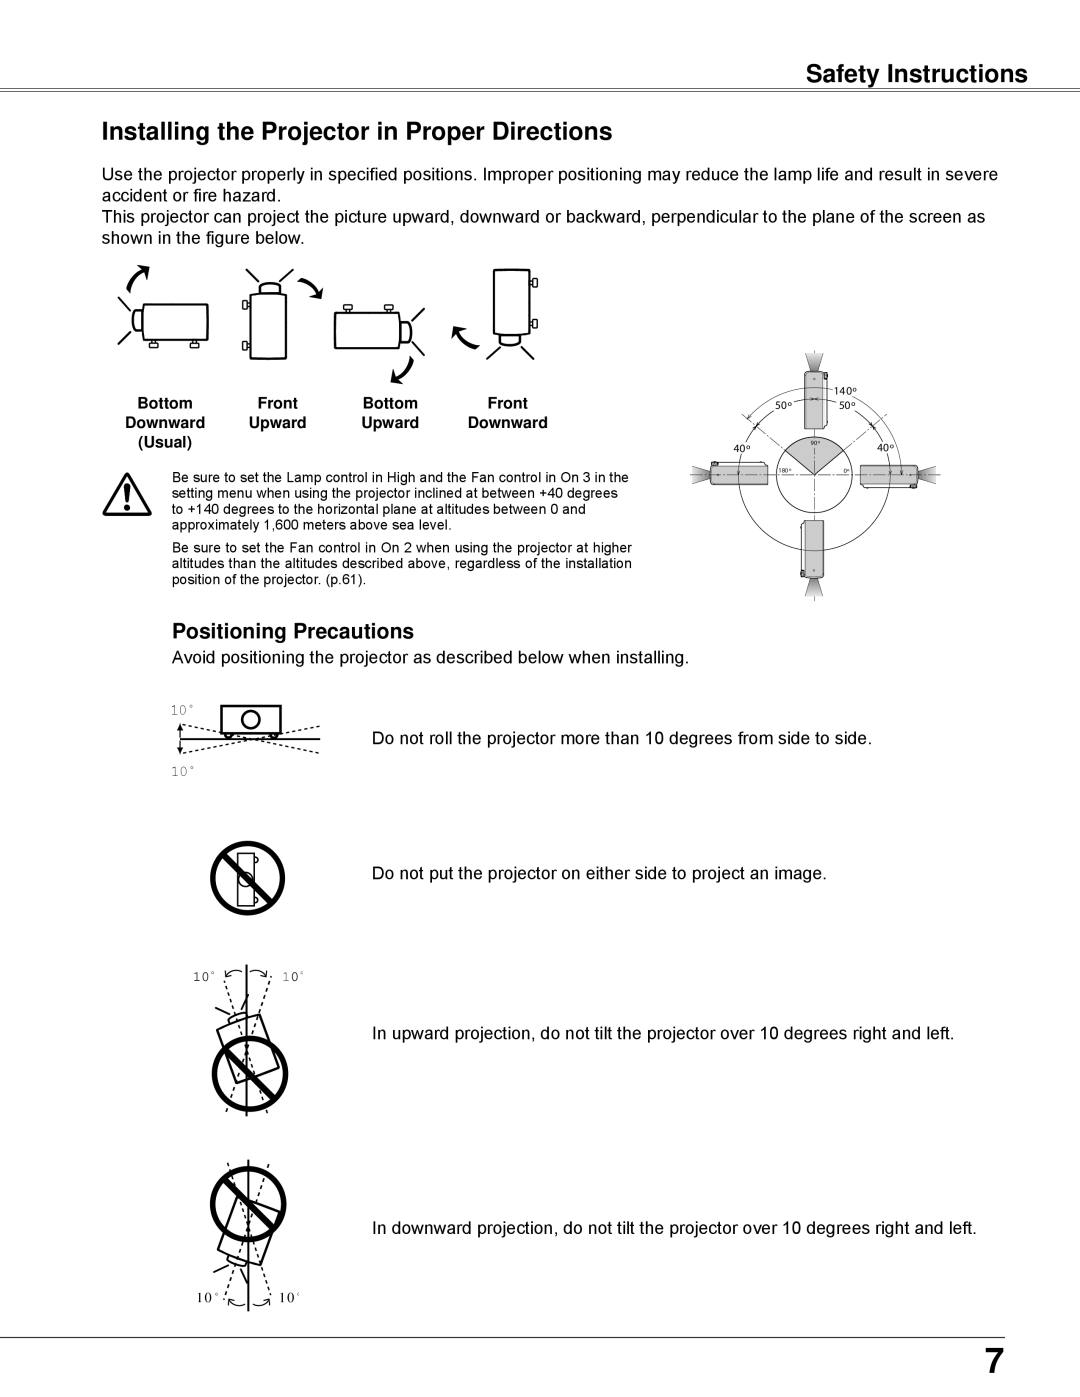 Eiki LC-WB42N owner manual Safety Instructions Installing the Projector in Proper Directions, Positioning Precautions 